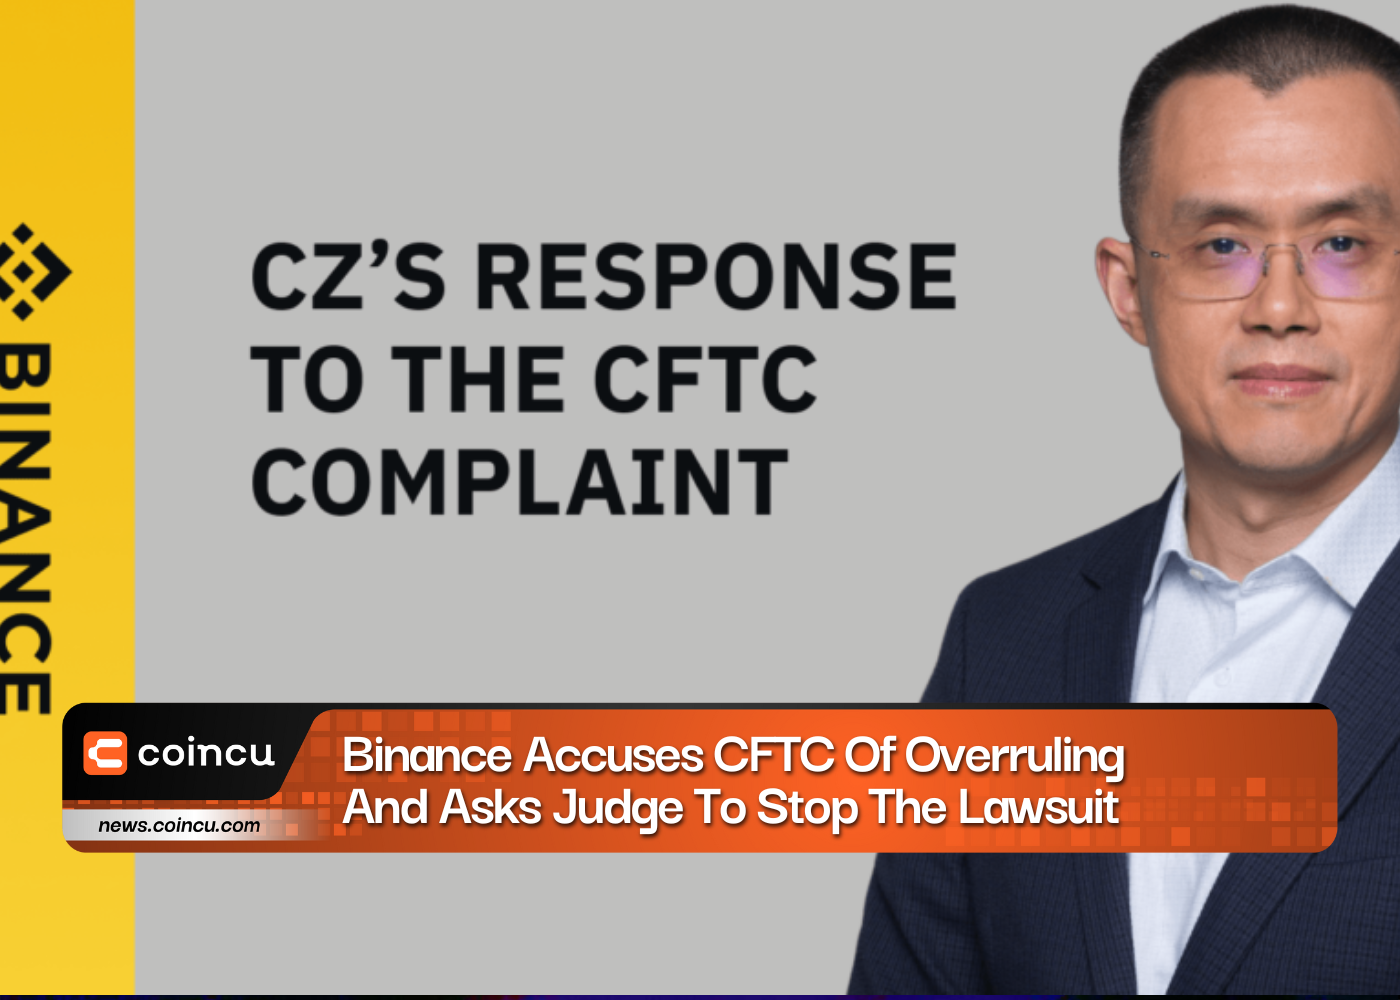 Binance Accuses CFTC Of Overruling And Asks Judge To Stop The Lawsuit